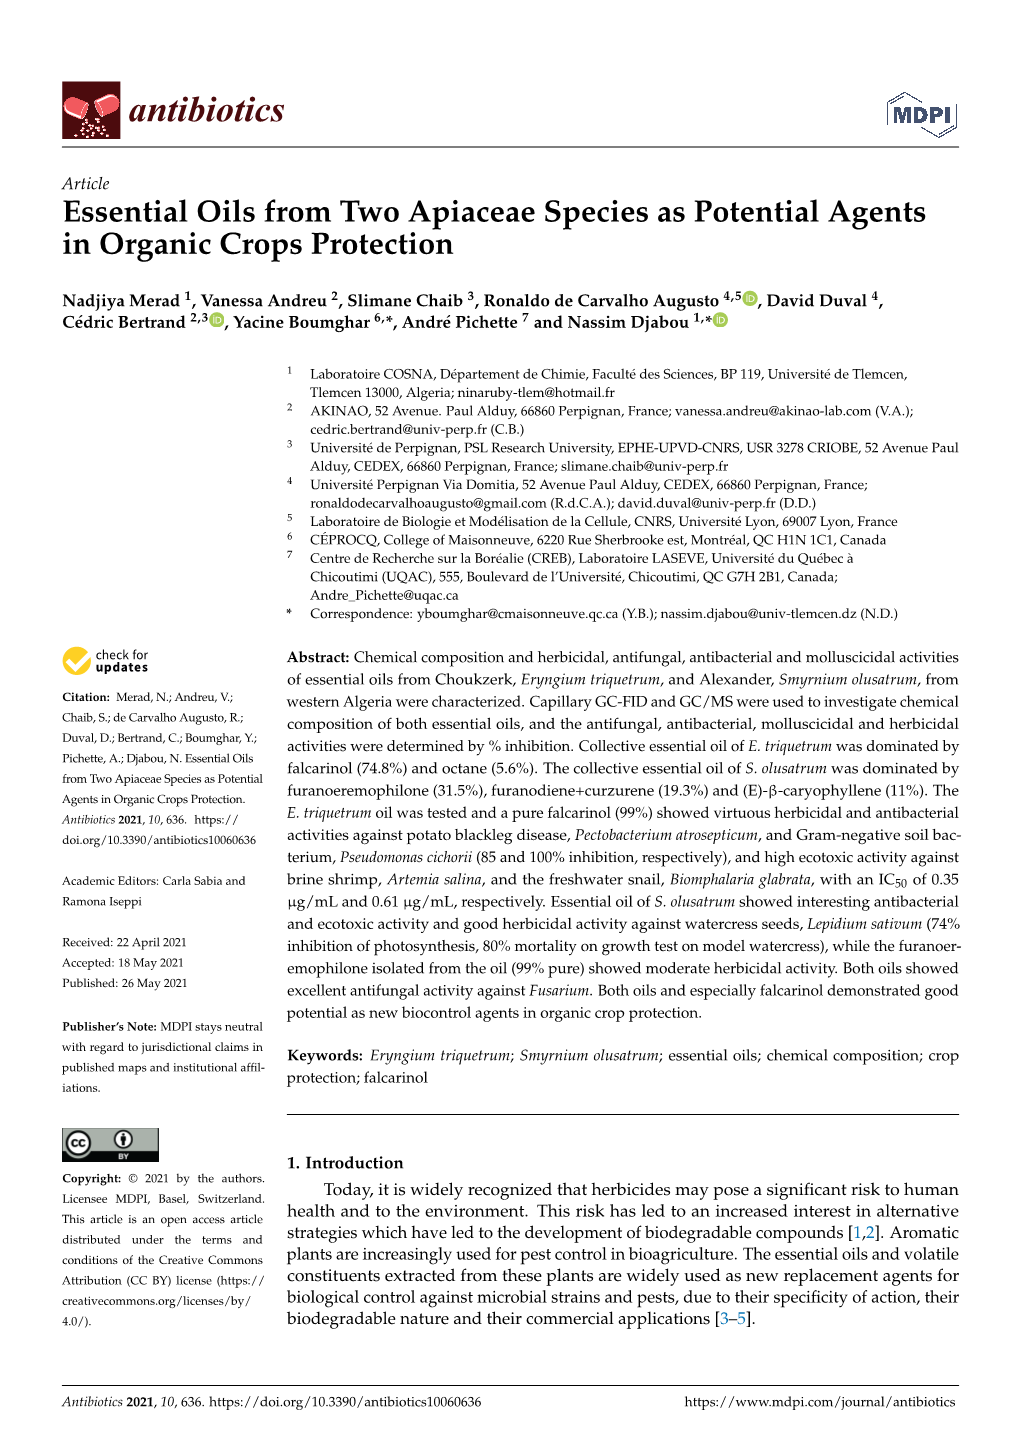 Essential Oils from Two Apiaceae Species As Potential Agents in Organic Crops Protection